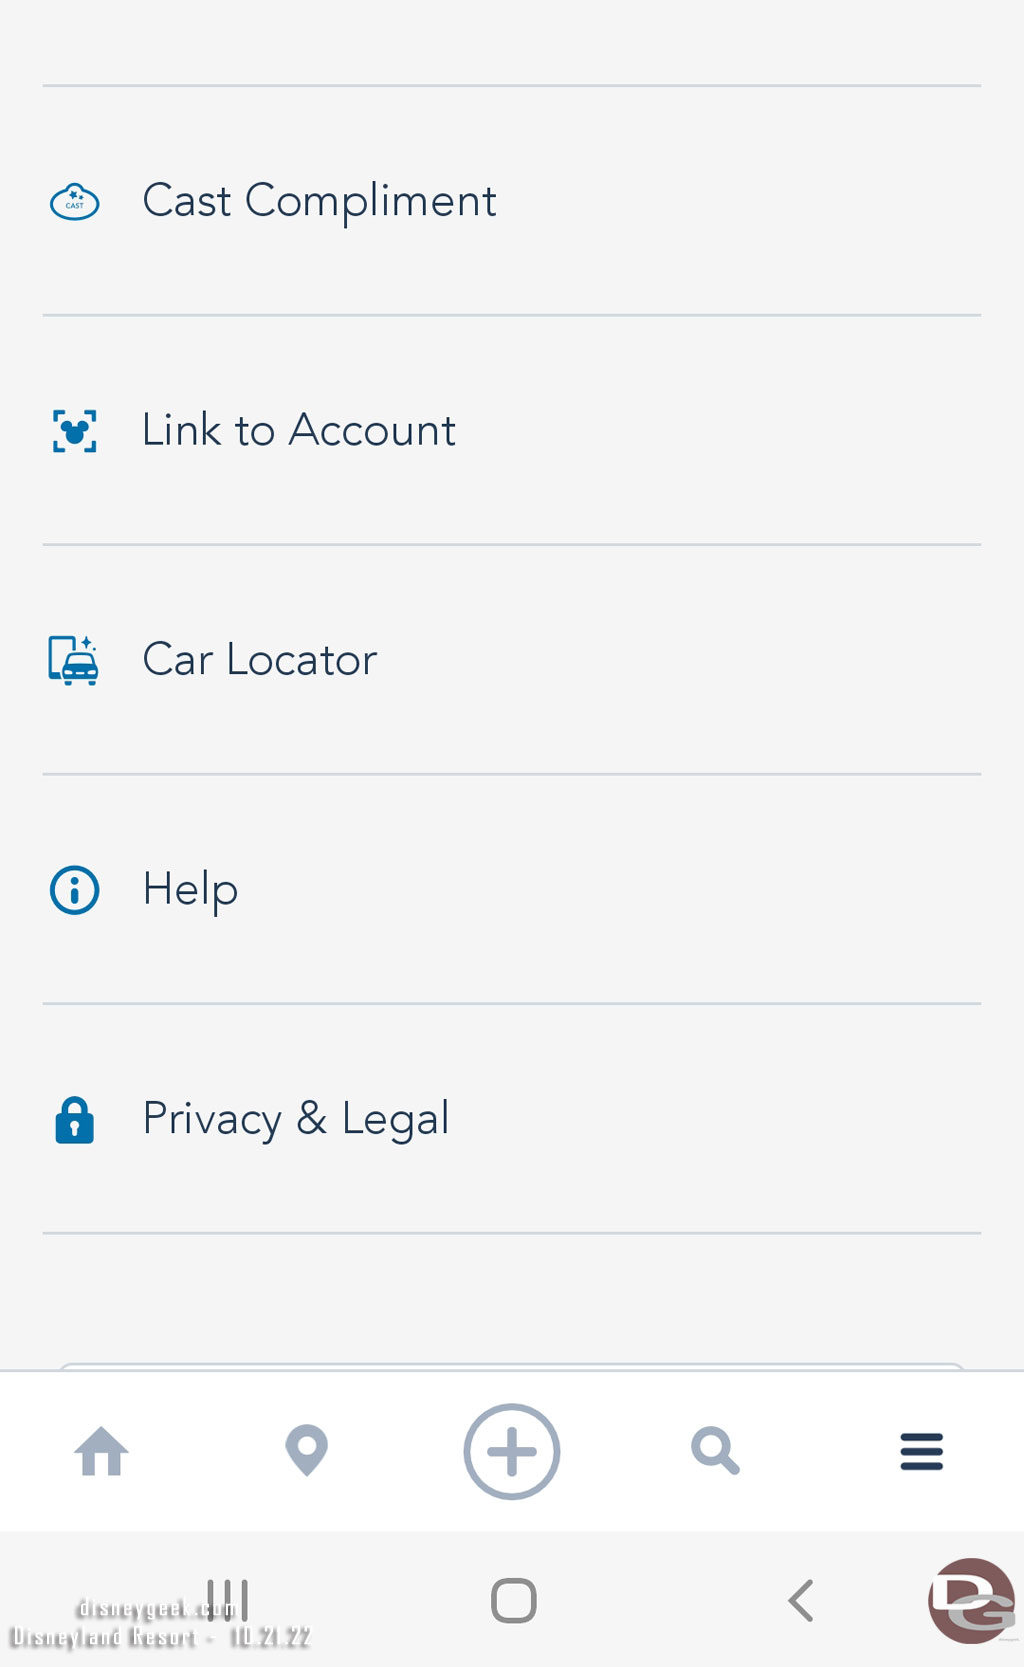 I started up the app and scrolled down to find the Car Locator button. It is near the bottom of the menu.